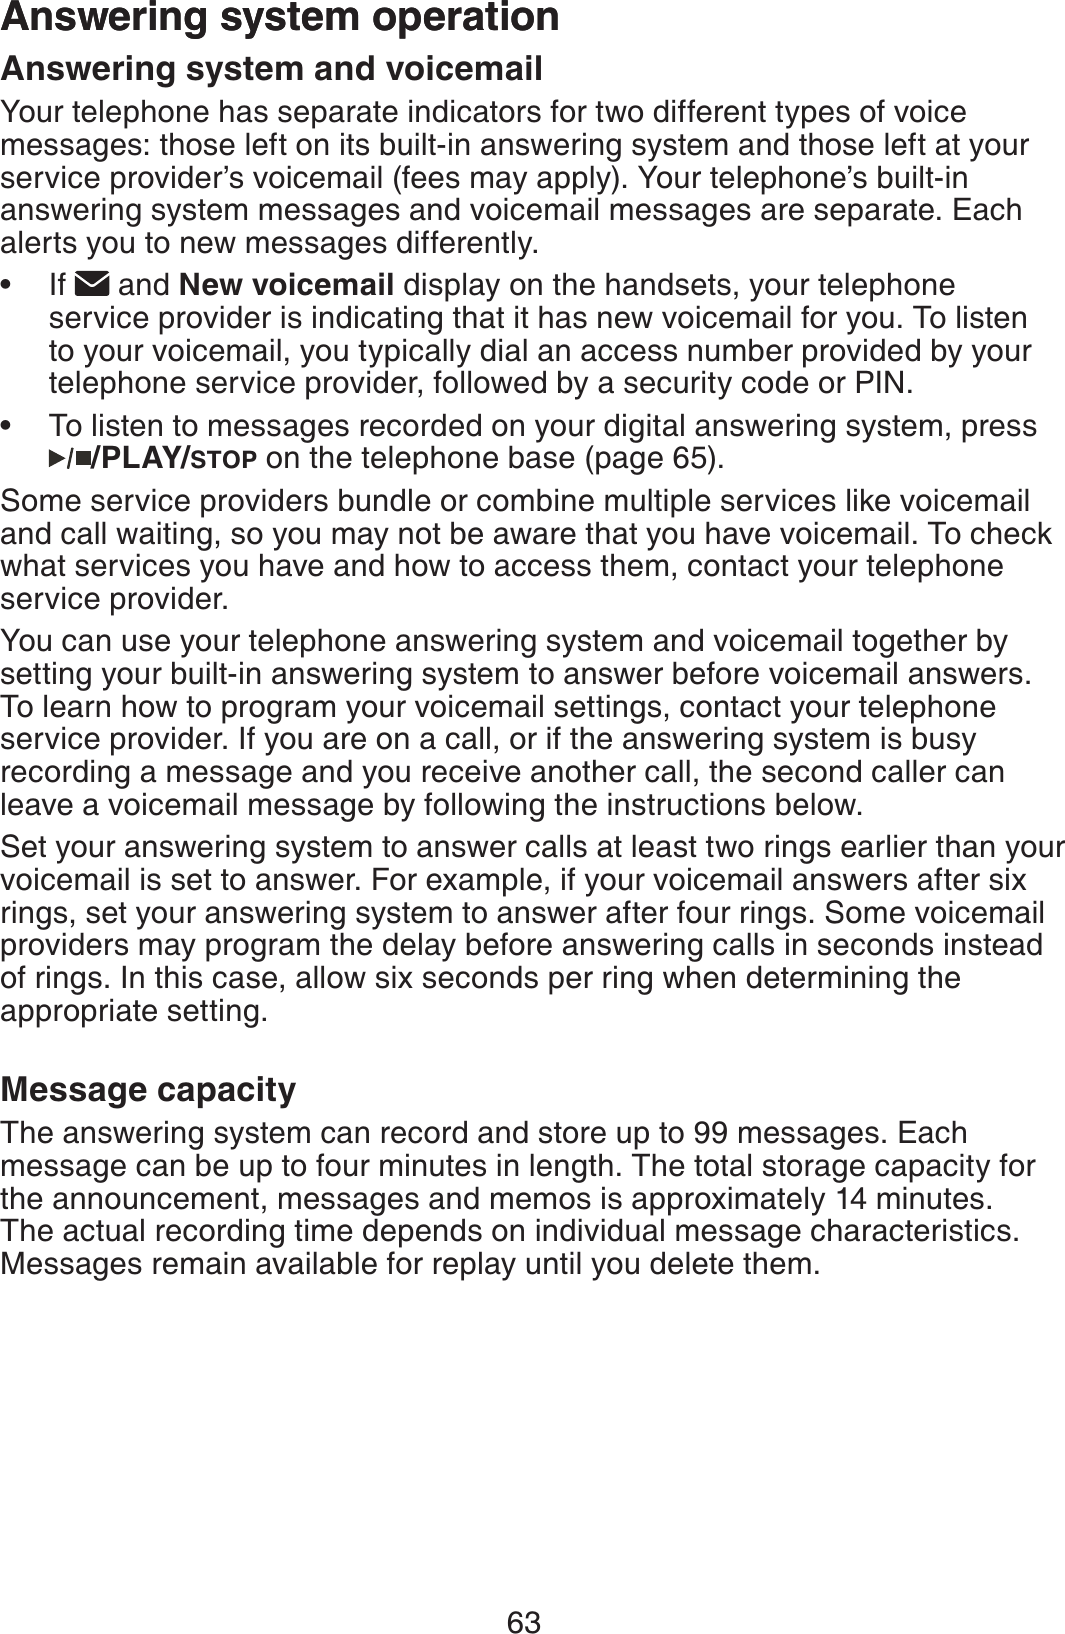 63Answering system operationAnswering system and voicemailYour telephone has separate indicators for two different types of voice messages: those left on its built-in answering system and those left at your service provider’s voicemail (fees may apply). Your telephone’s built-in answering system messages and voicemail messages are separate. Each alerts you to new messages differently. If   and New voicemail display on the handsets, your telephone service provider is indicating that it has new voicemail for you. To listen to your voicemail, you typically dial an access number provided by your telephone service provider, followed by a security code or PIN.To listen to messages recorded on your digital answering system, press /PLAY/STOP on the telephone base (page 65).Some service providers bundle or combine multiple services like voicemail and call waiting, so you may not be aware that you have voicemail. To check what services you have and how to access them, contact your telephone service provider.You can use your telephone answering system and voicemail together by setting your built-in answering system to answer before voicemail answers. To learn how to program your voicemail settings, contact your telephone service provider. If you are on a call, or if the answering system is busy recording a message and you receive another call, the second caller can leave a voicemail message by following the instructions below.Set your answering system to answer calls at least two rings earlier than your voicemail is set to answer. For example, if your voicemail answers after six rings, set your answering system to answer after four rings. Some voicemail providers may program the delay before answering calls in seconds instead of rings. In this case, allow six seconds per ring when determining the appropriate setting. Message capacityThe answering system can record and store up to 99 messages. Each message can be up to four minutes in length. The total storage capacity for the announcement, messages and memos is approximately 14 minutes. The actual recording time depends on individual message characteristics. Messages remain available for replay until you delete them.••Answering system operation